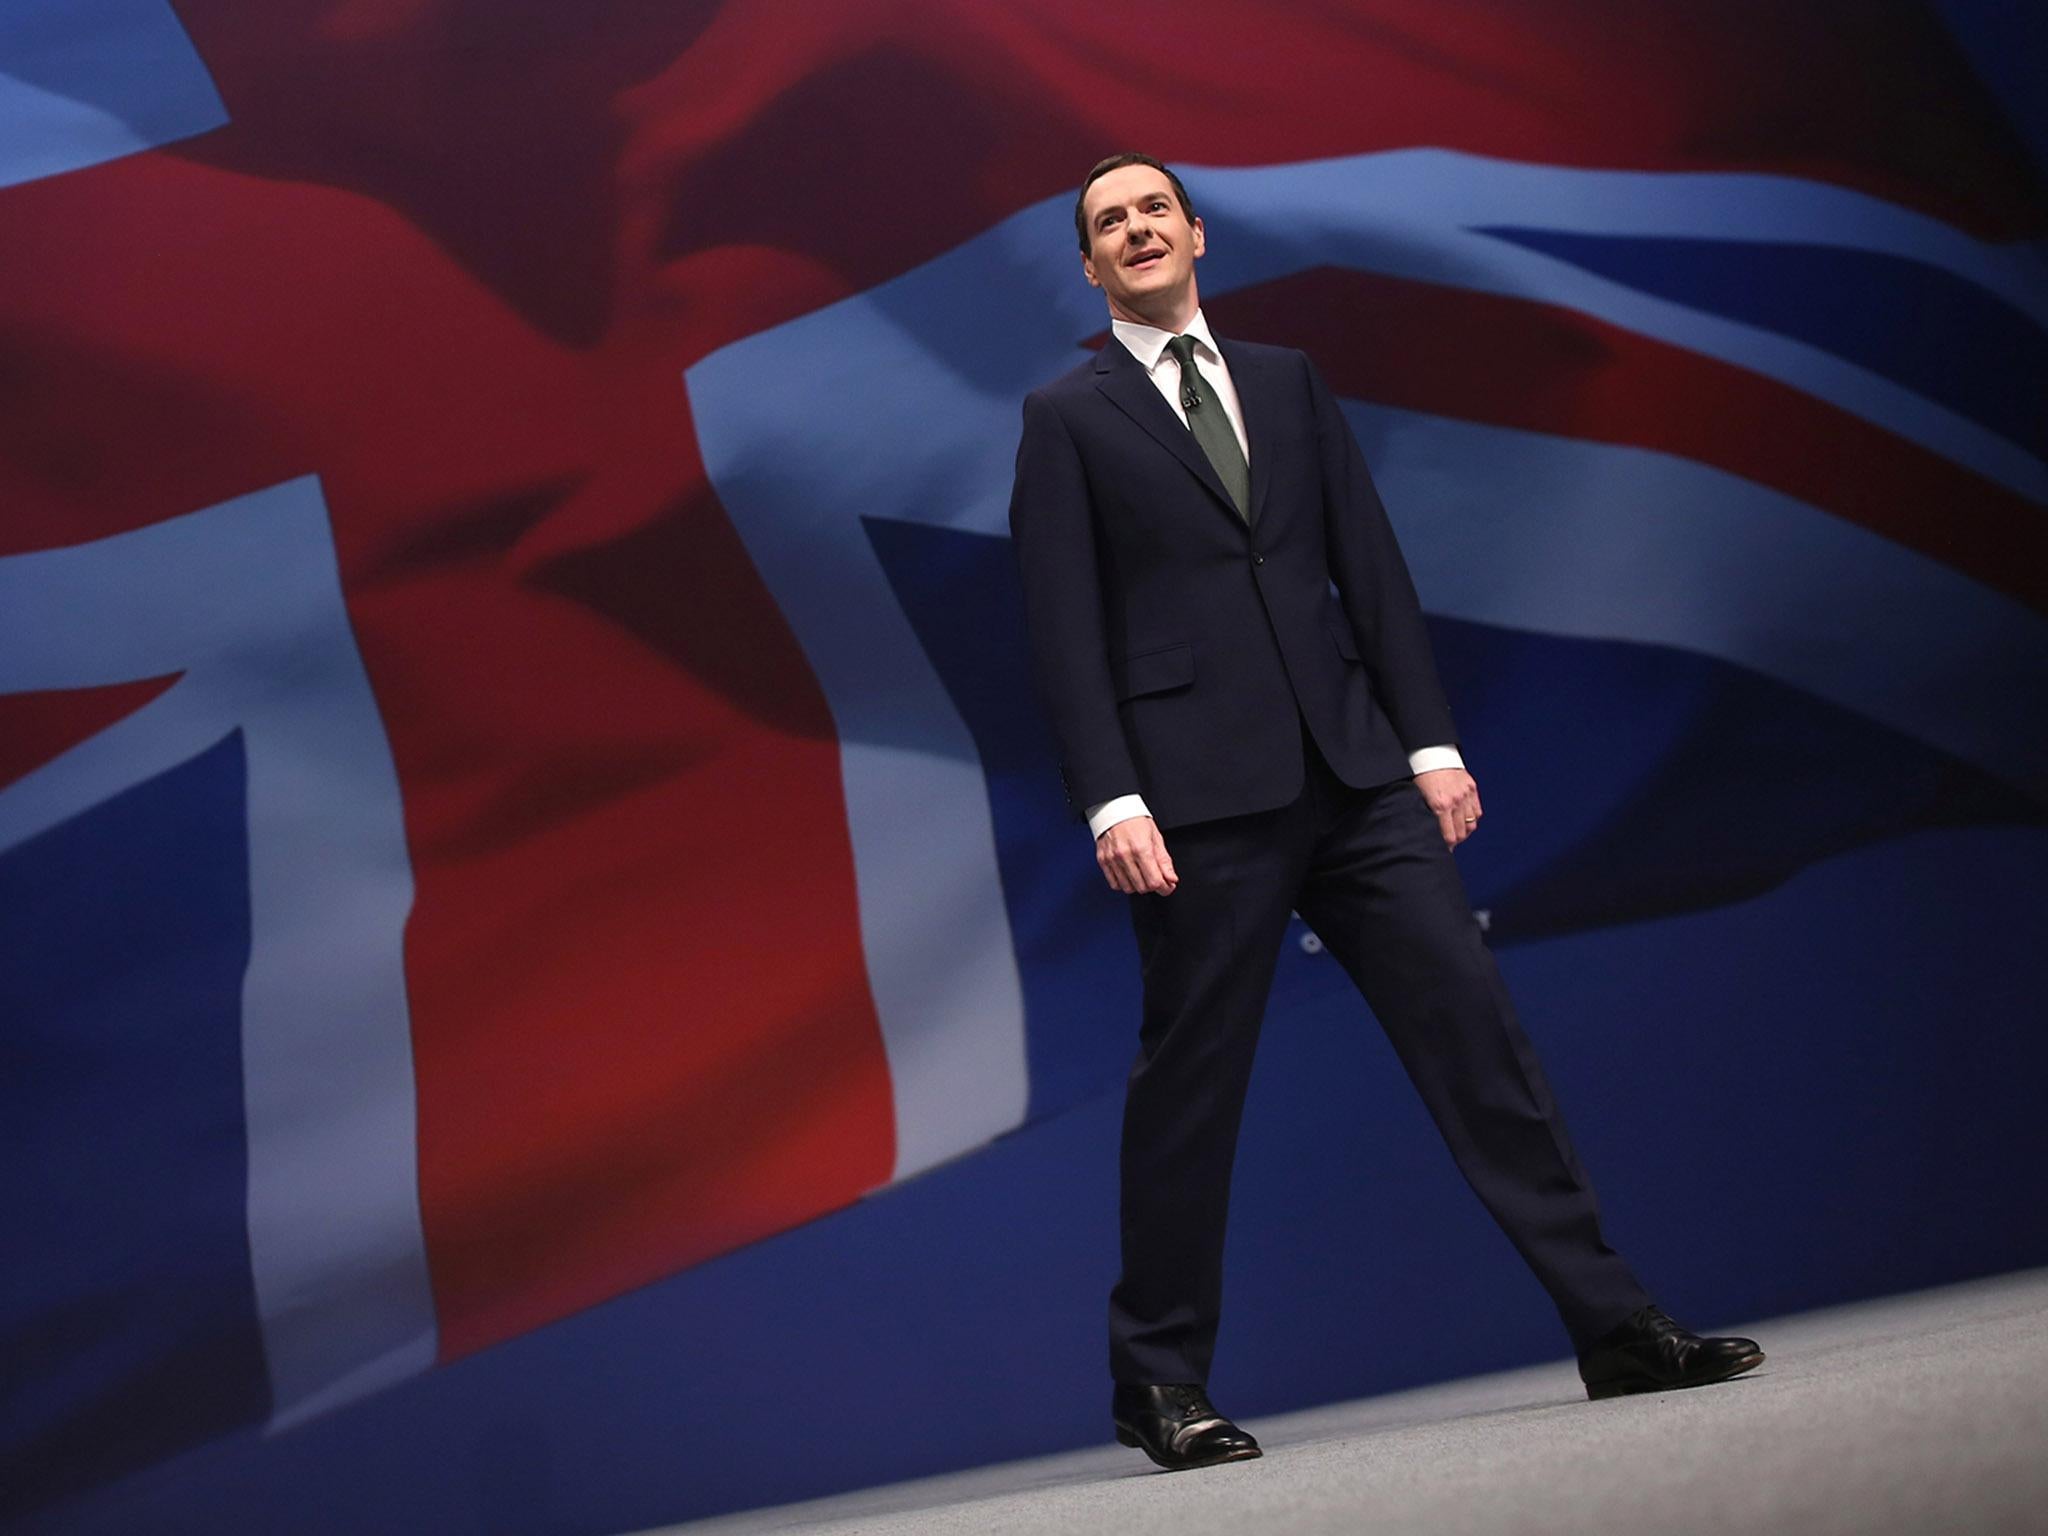 George Osborne was ridiculed for standing with his legs wide apart at the Conservative Party conference last year